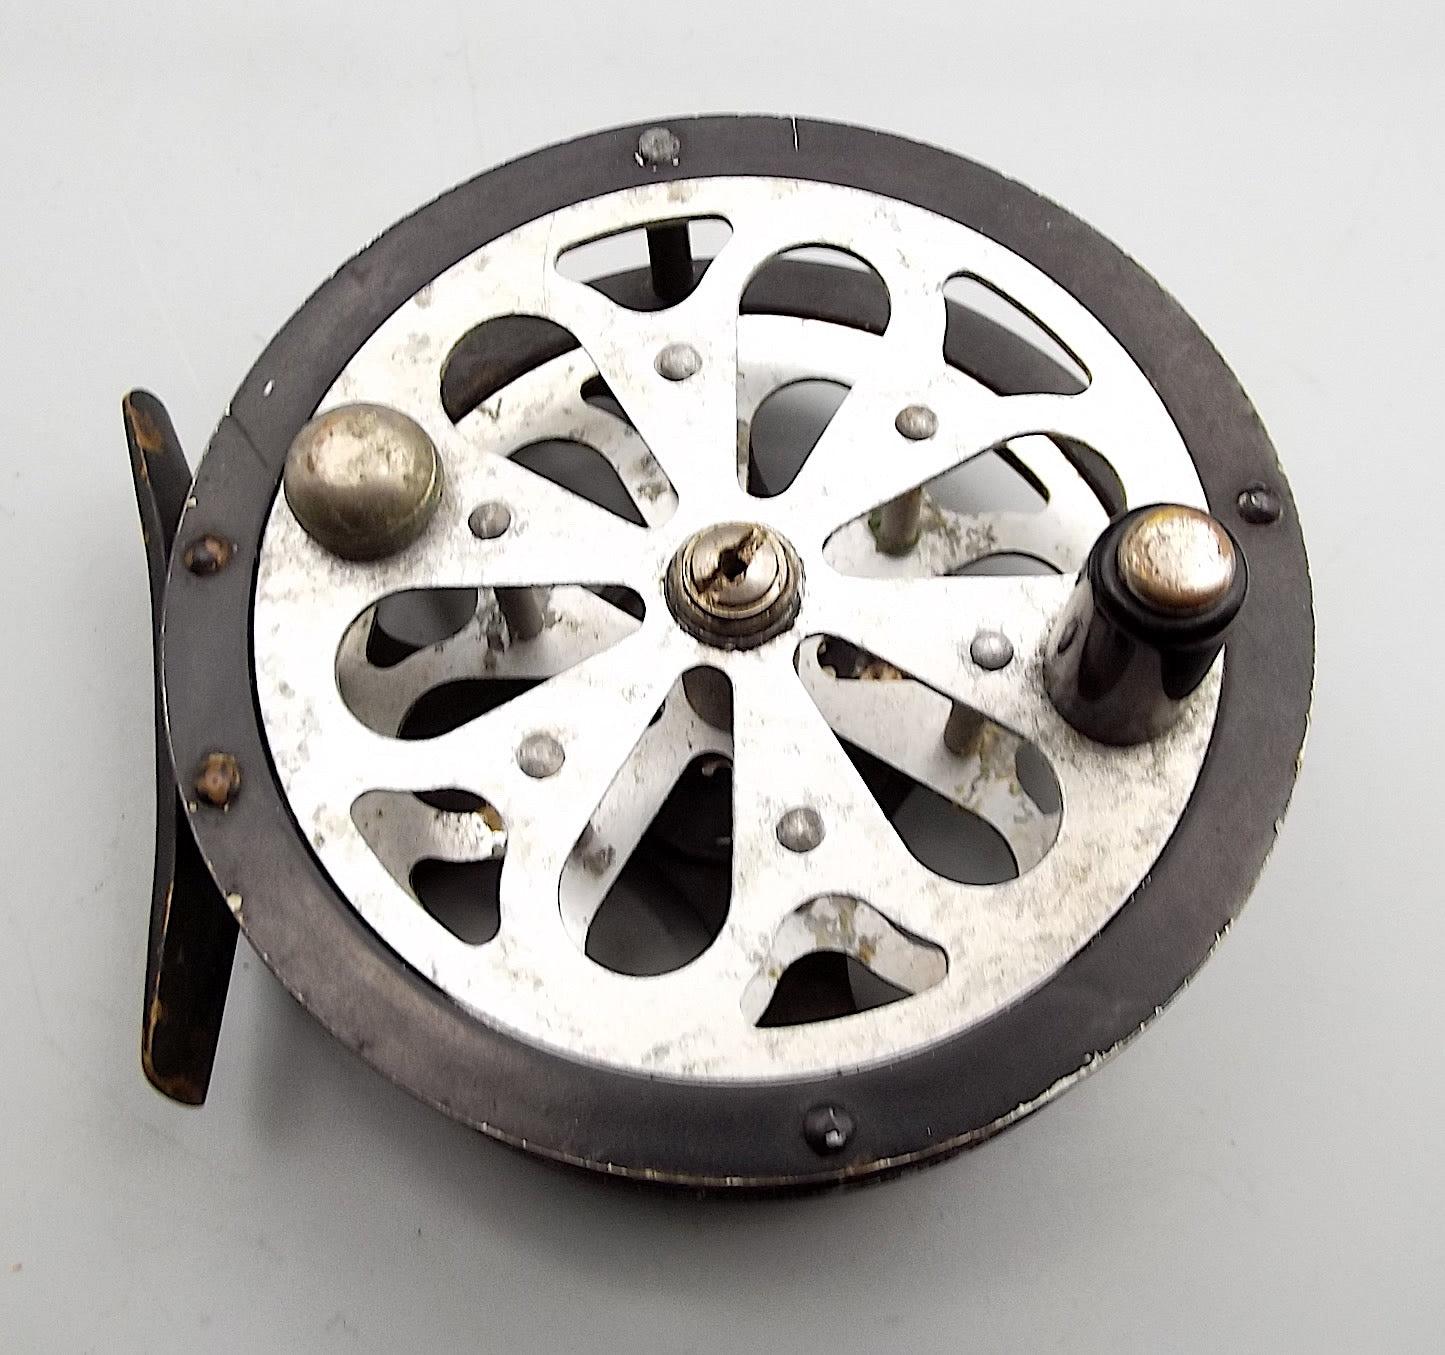 Vintage Pflueger Sal-Trout No 1554 Fly Fishing Reel